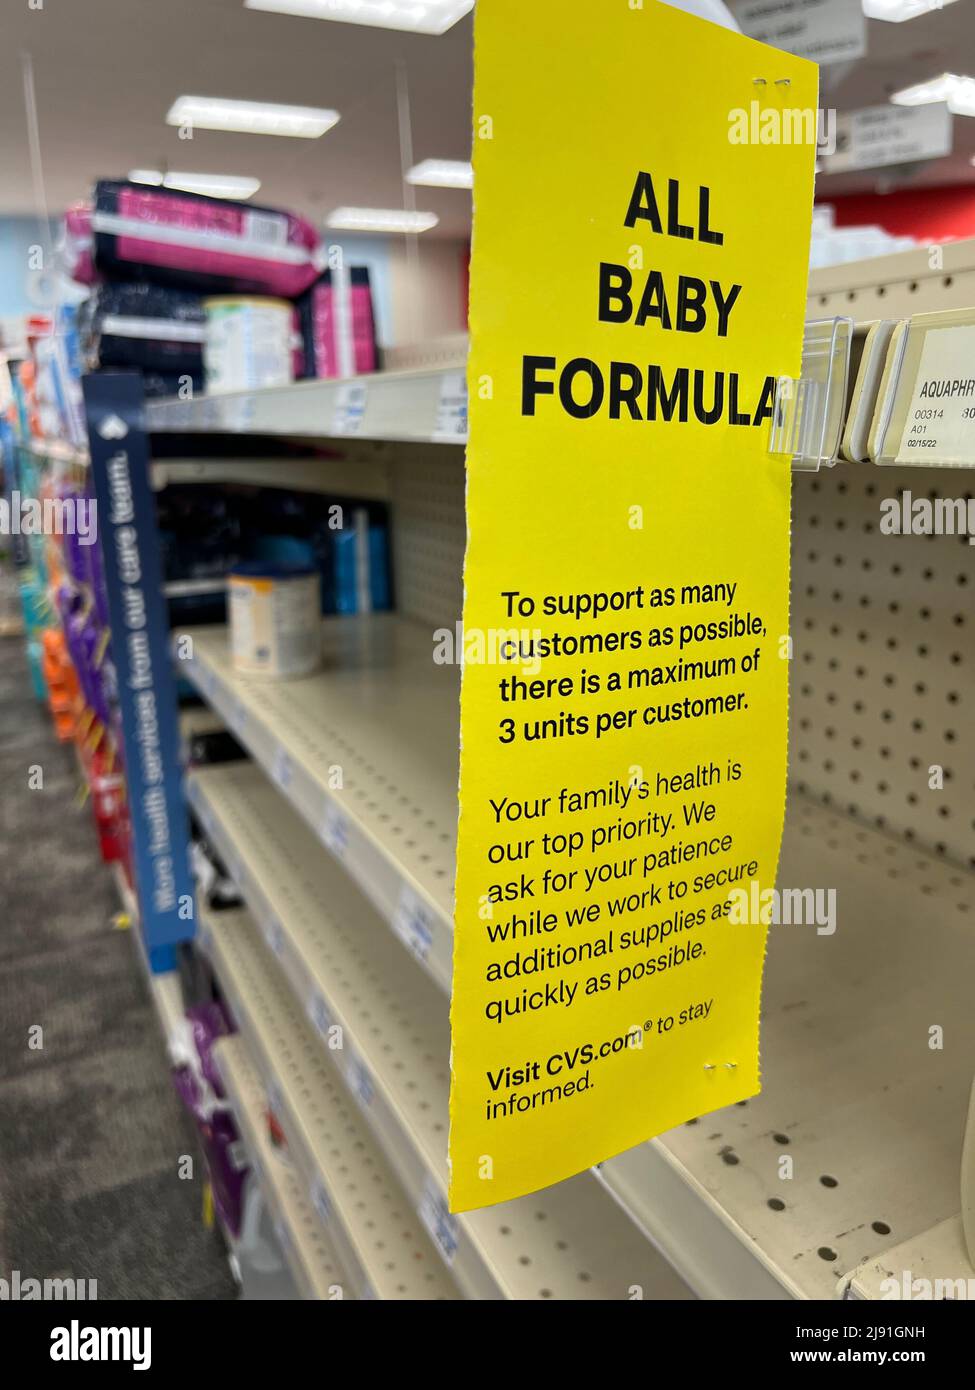 Empty shelves at a CVS store in suburban Chicago show how widespread the baby formula shortage is. Customers are limited to how much they can purchase Stock Photo